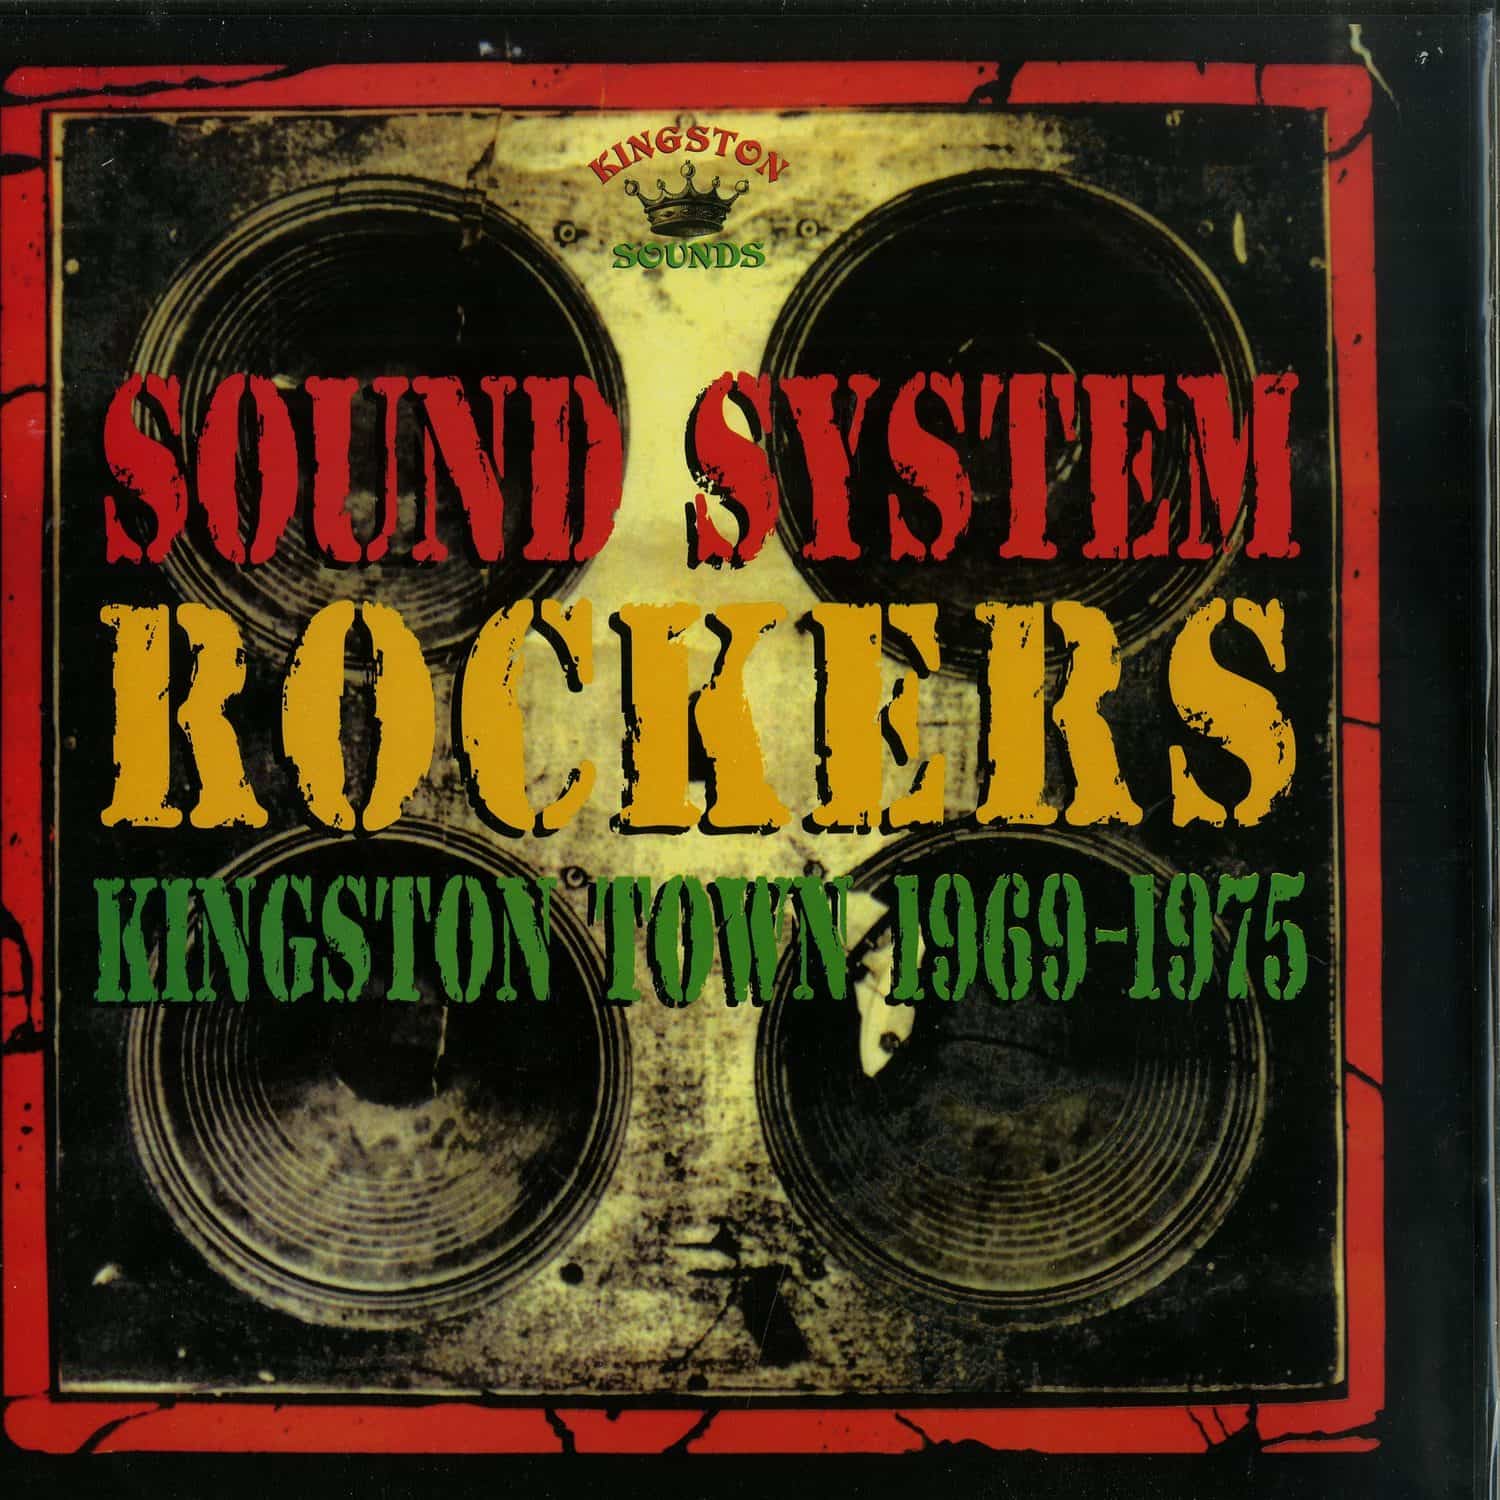 Various Artists - SOUND SYSTEM ROCKERS - KINGSTON TOWN 1969 -1975 